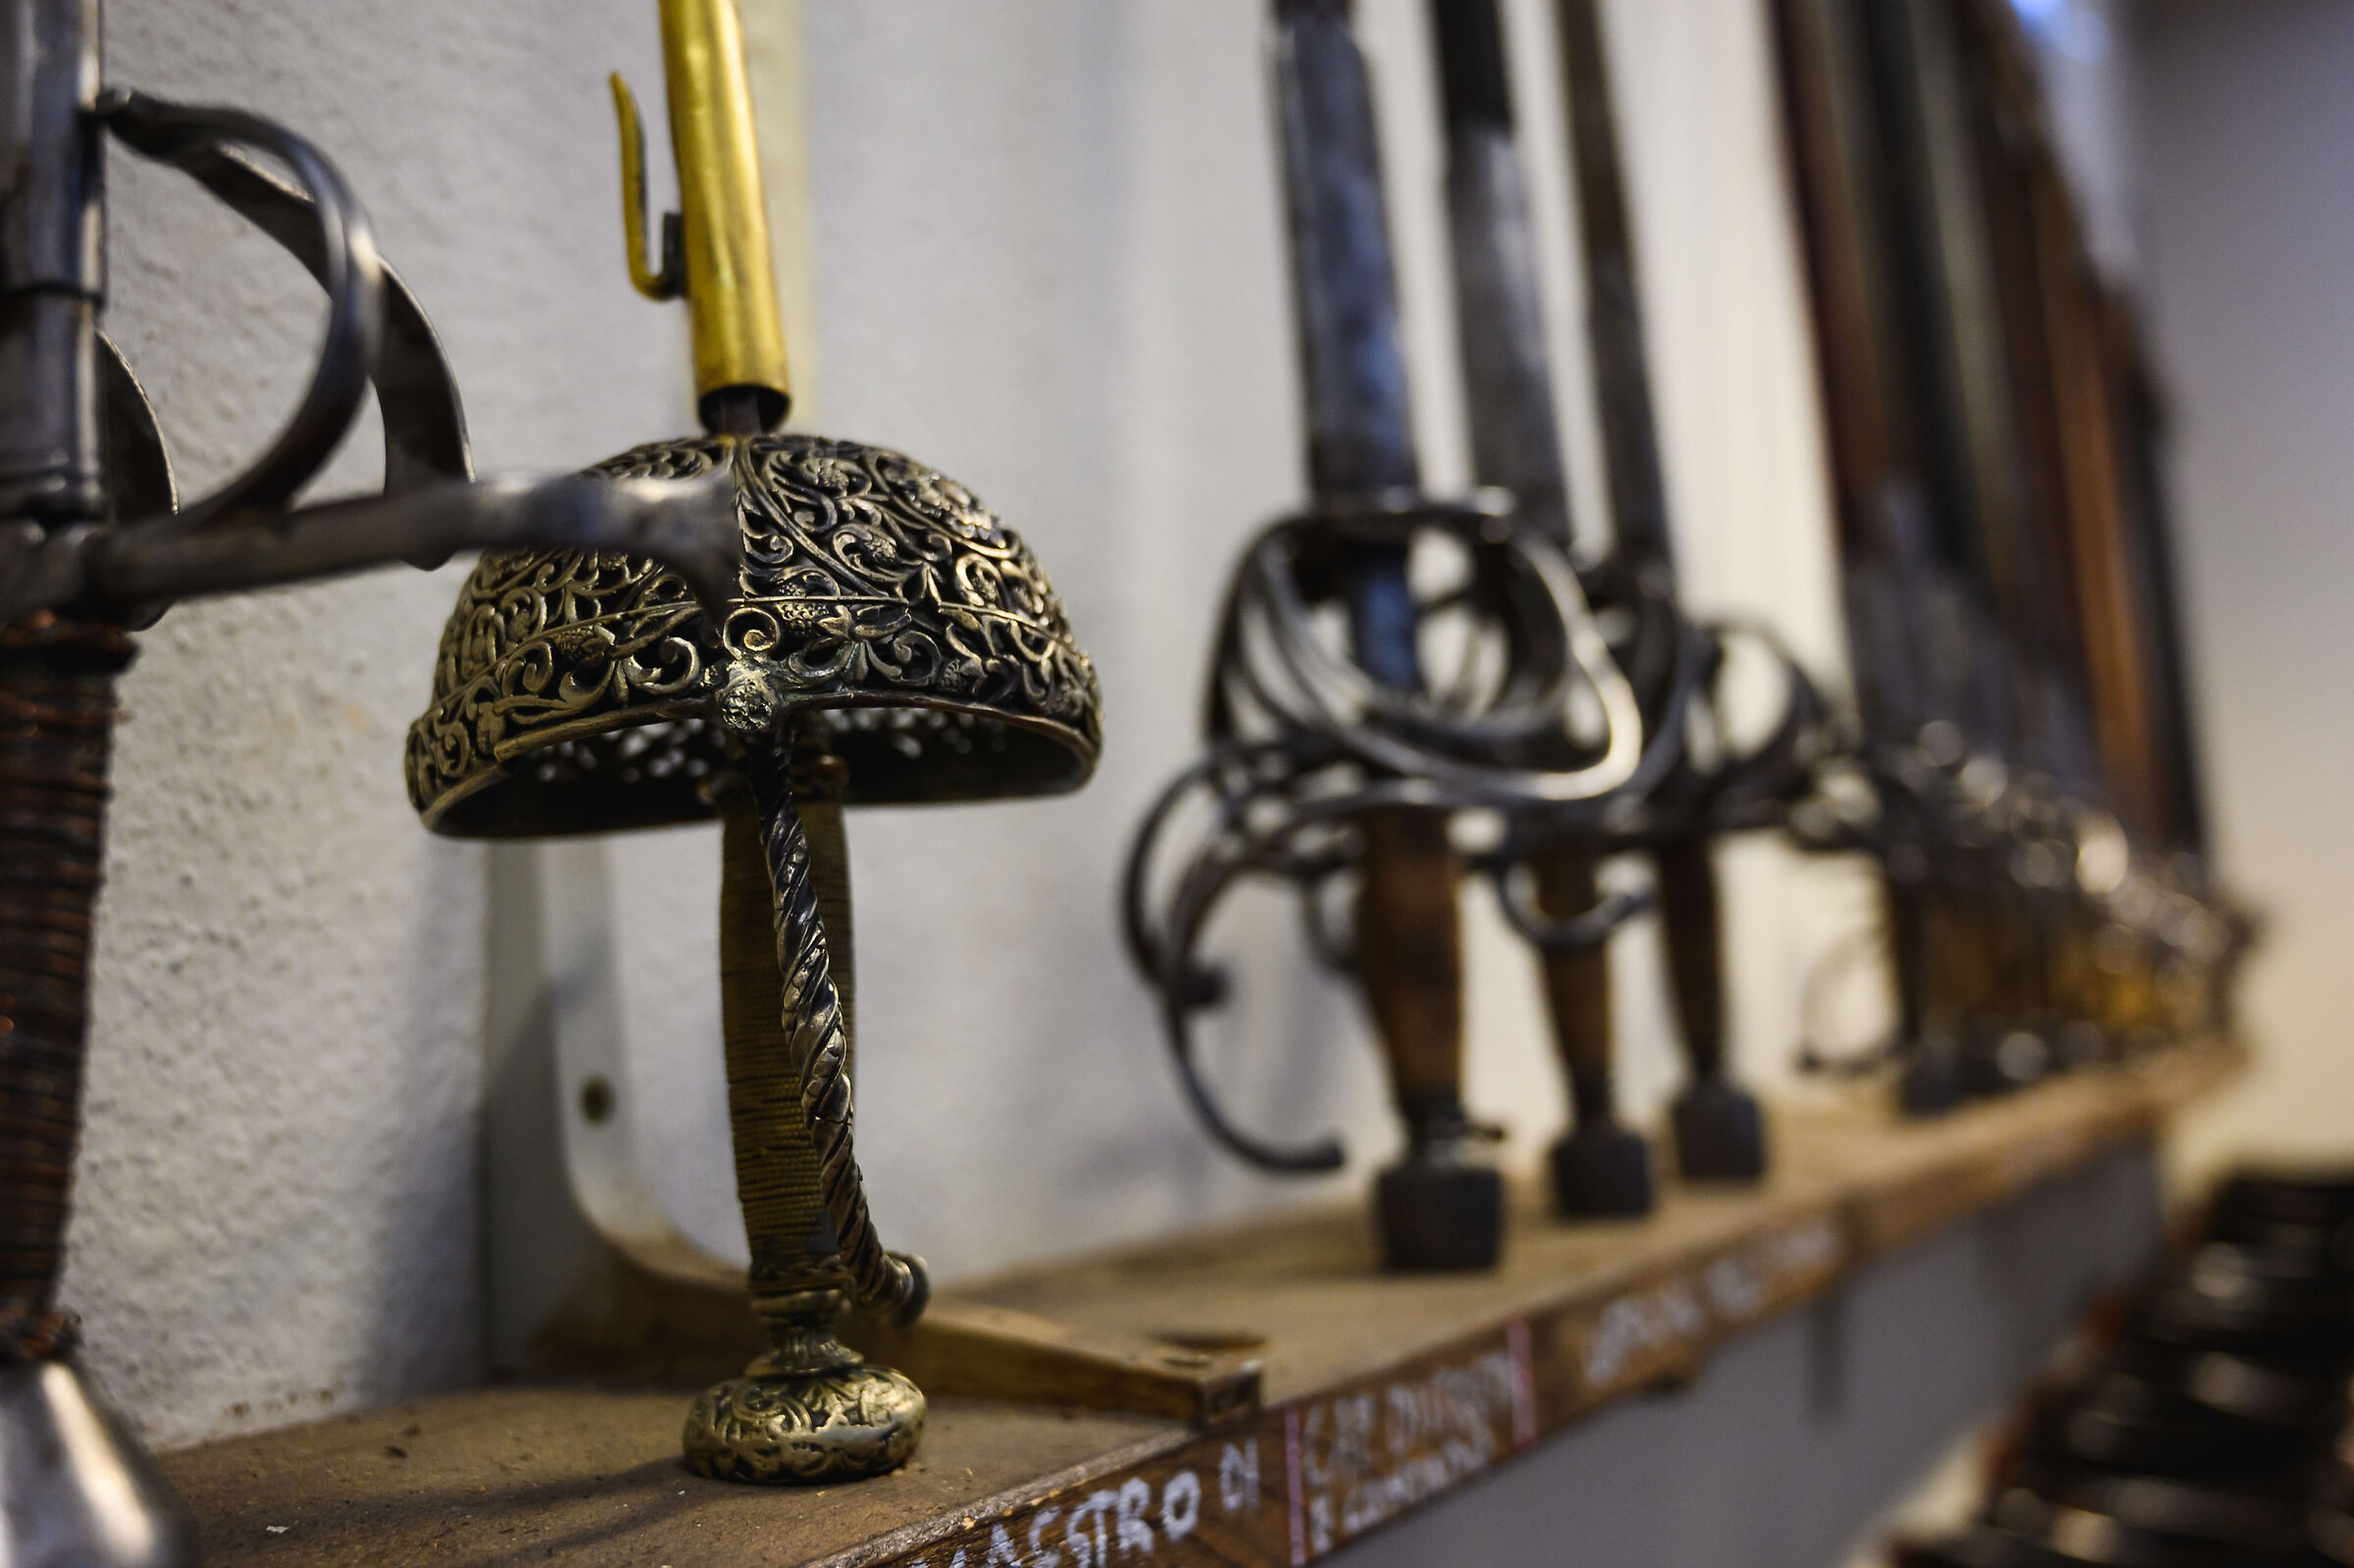 Handmade swords for the "Historic Football" in Florence...